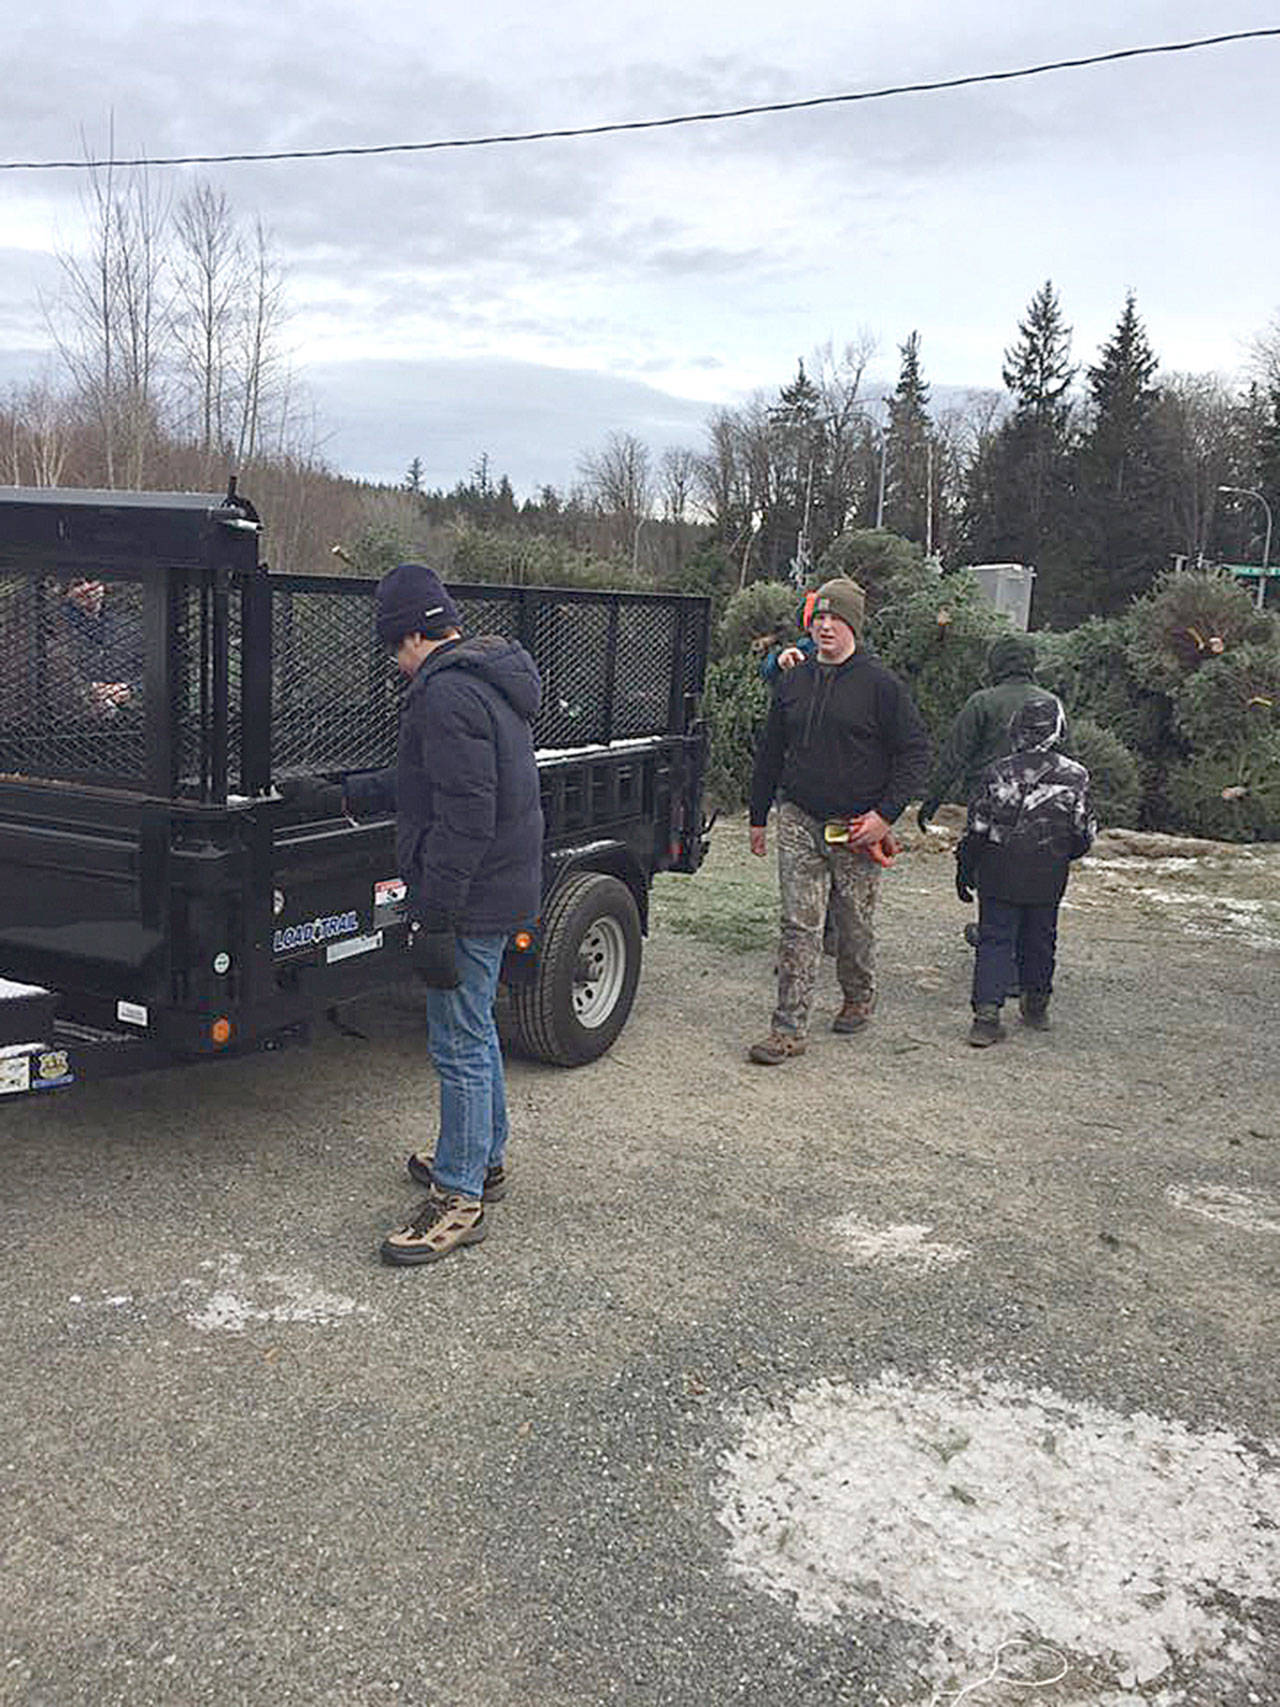 Local Boy Scout Troops 115, 425, and 466 will be picking up the trees within the North Bend, Snoqualmie and Fall City areas on Saturday, January 5 from 9 a.m. - 4 p.m. Photo courtesy of Boy Scout Troop 466